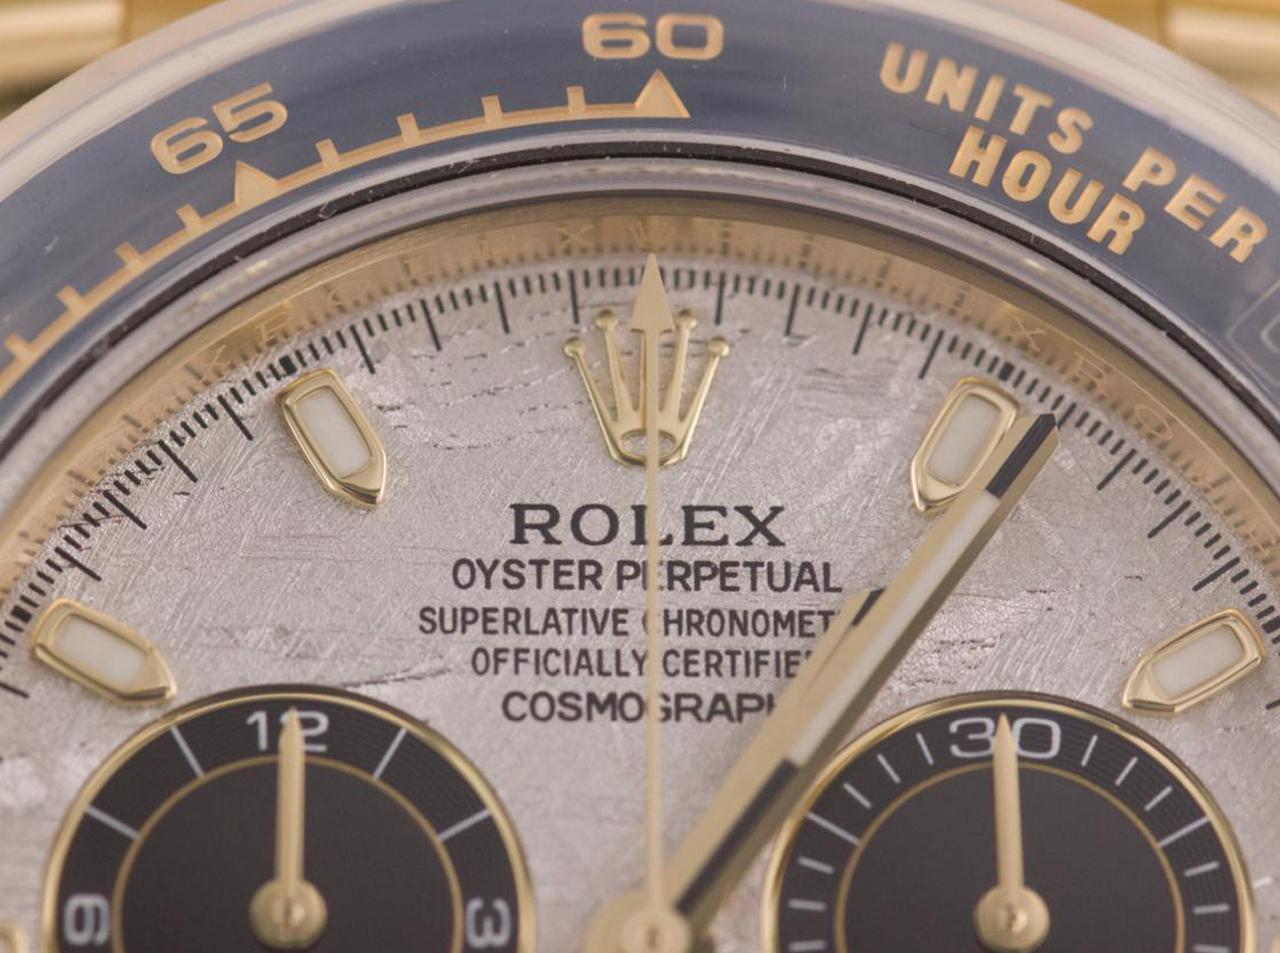 Rolex Cosmograph Daytona 40 Meteorite Dial Oysterflex Yellow Gold Watch 116518LN In New Condition For Sale In Aventura, FL